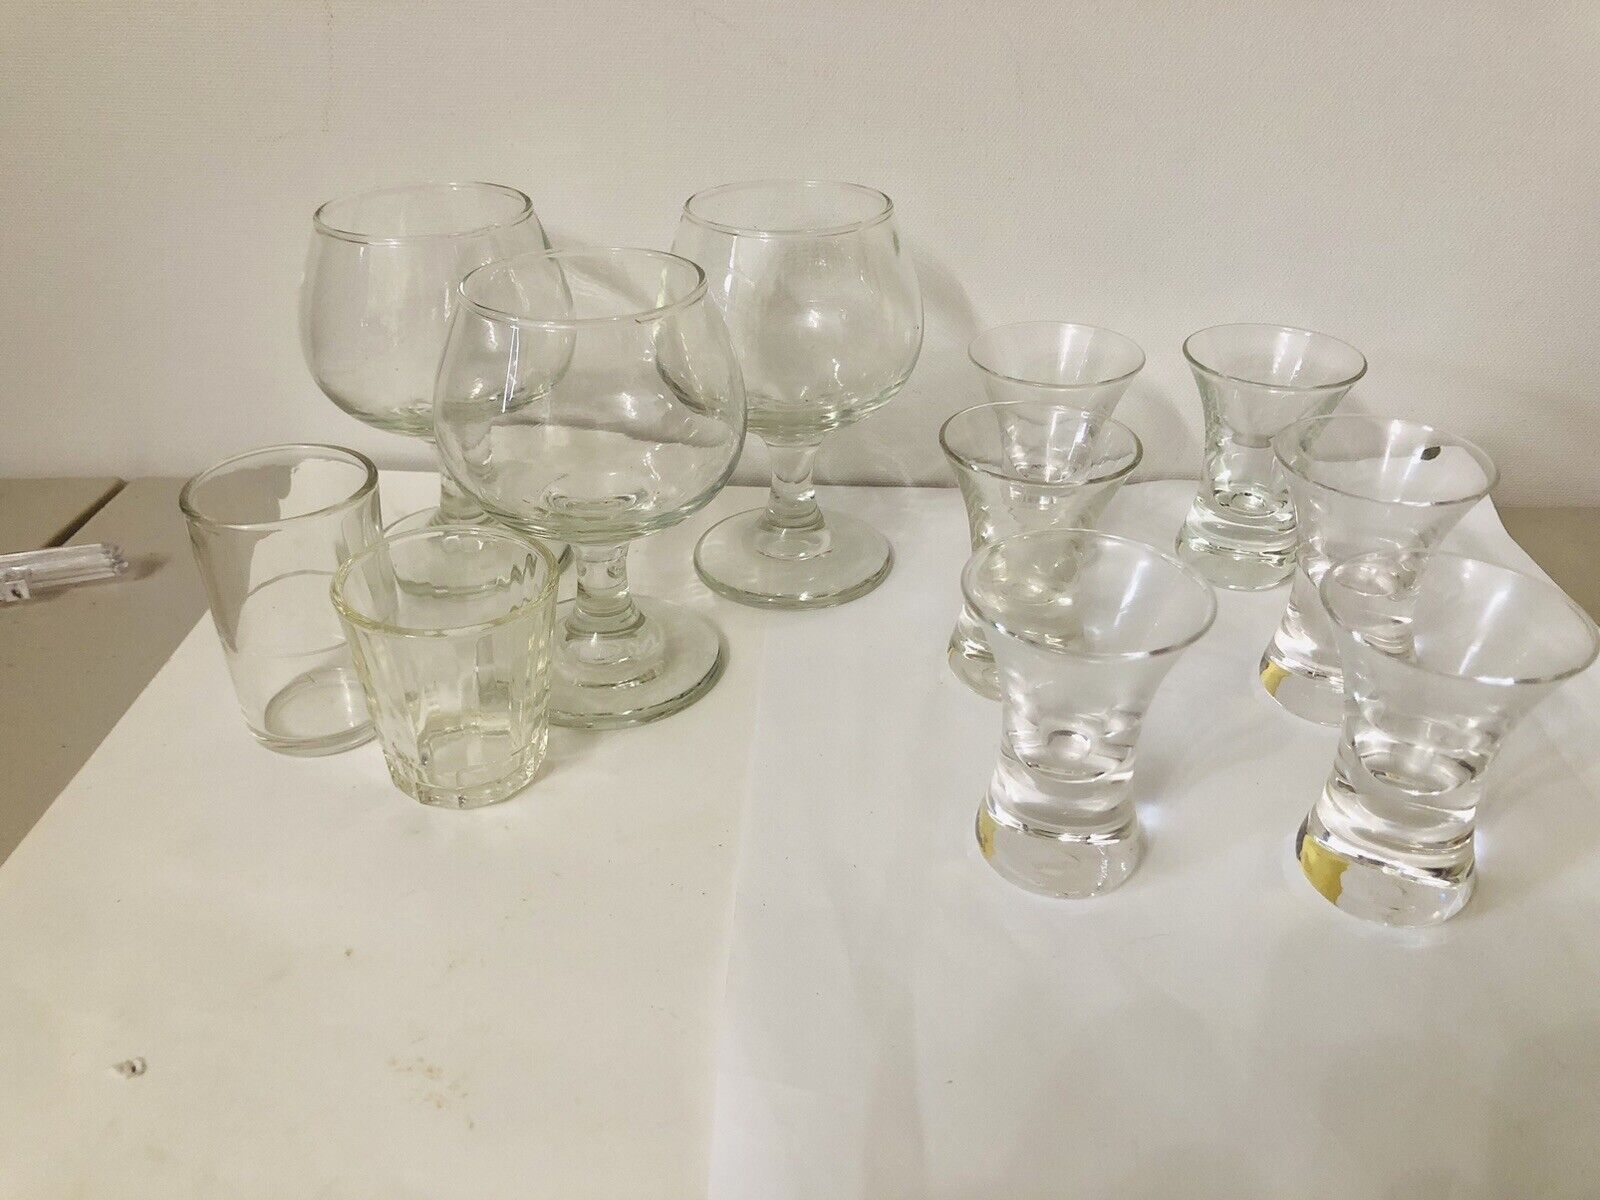 Vintage Glassware 1970 11pc Lot 3 Brandy Snifters 8 Shot Glasses 3-4 Inch Tall